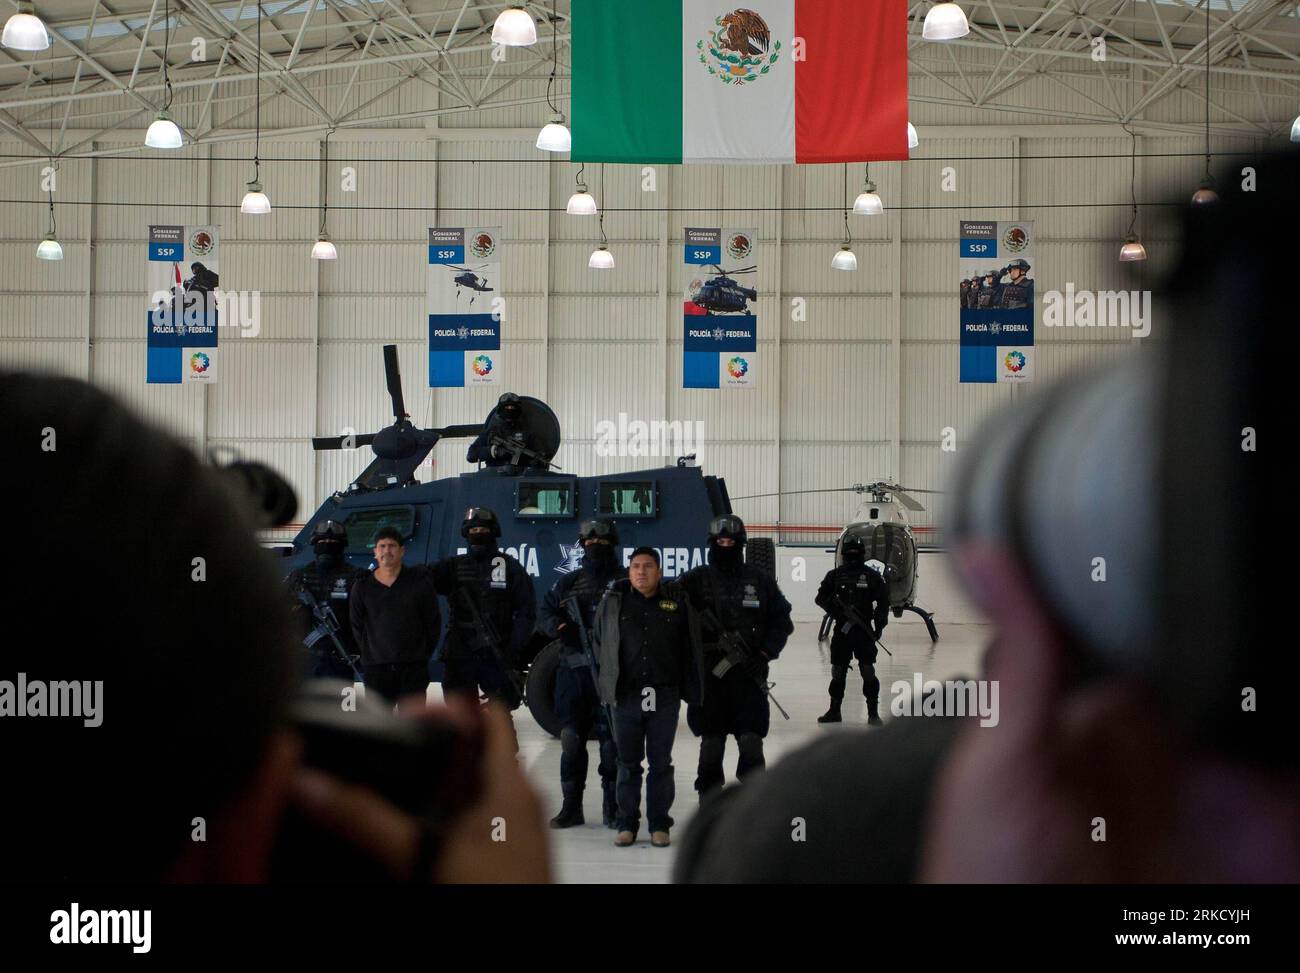 Bildnummer: 54829965  Datum: 18.01.2011  Copyright: imago/Xinhua MEXICO CITY, Jan. 18, 2011 (Xinhua) -- Federal police escort suspect Flavio Mendez Santiago (R Front), also known as El Amarillo , as he is presented to the media during a news conference at the federal police headquarters in Mexico City January 18, 2011. Santiago, who was arrested on Monday in Oaxaca, is one of the leaders of drug hitmen group Los Zetas , according to police. (Xinhua/Bernardo Montoya) (wjd) MEXICO-DRUG-TRAFFICKING PUBLICATIONxNOTxINxCHN Gesellschaft Drogen Militär Verhaftung Kriminalität Drogenkriminalität Droge Stock Photo